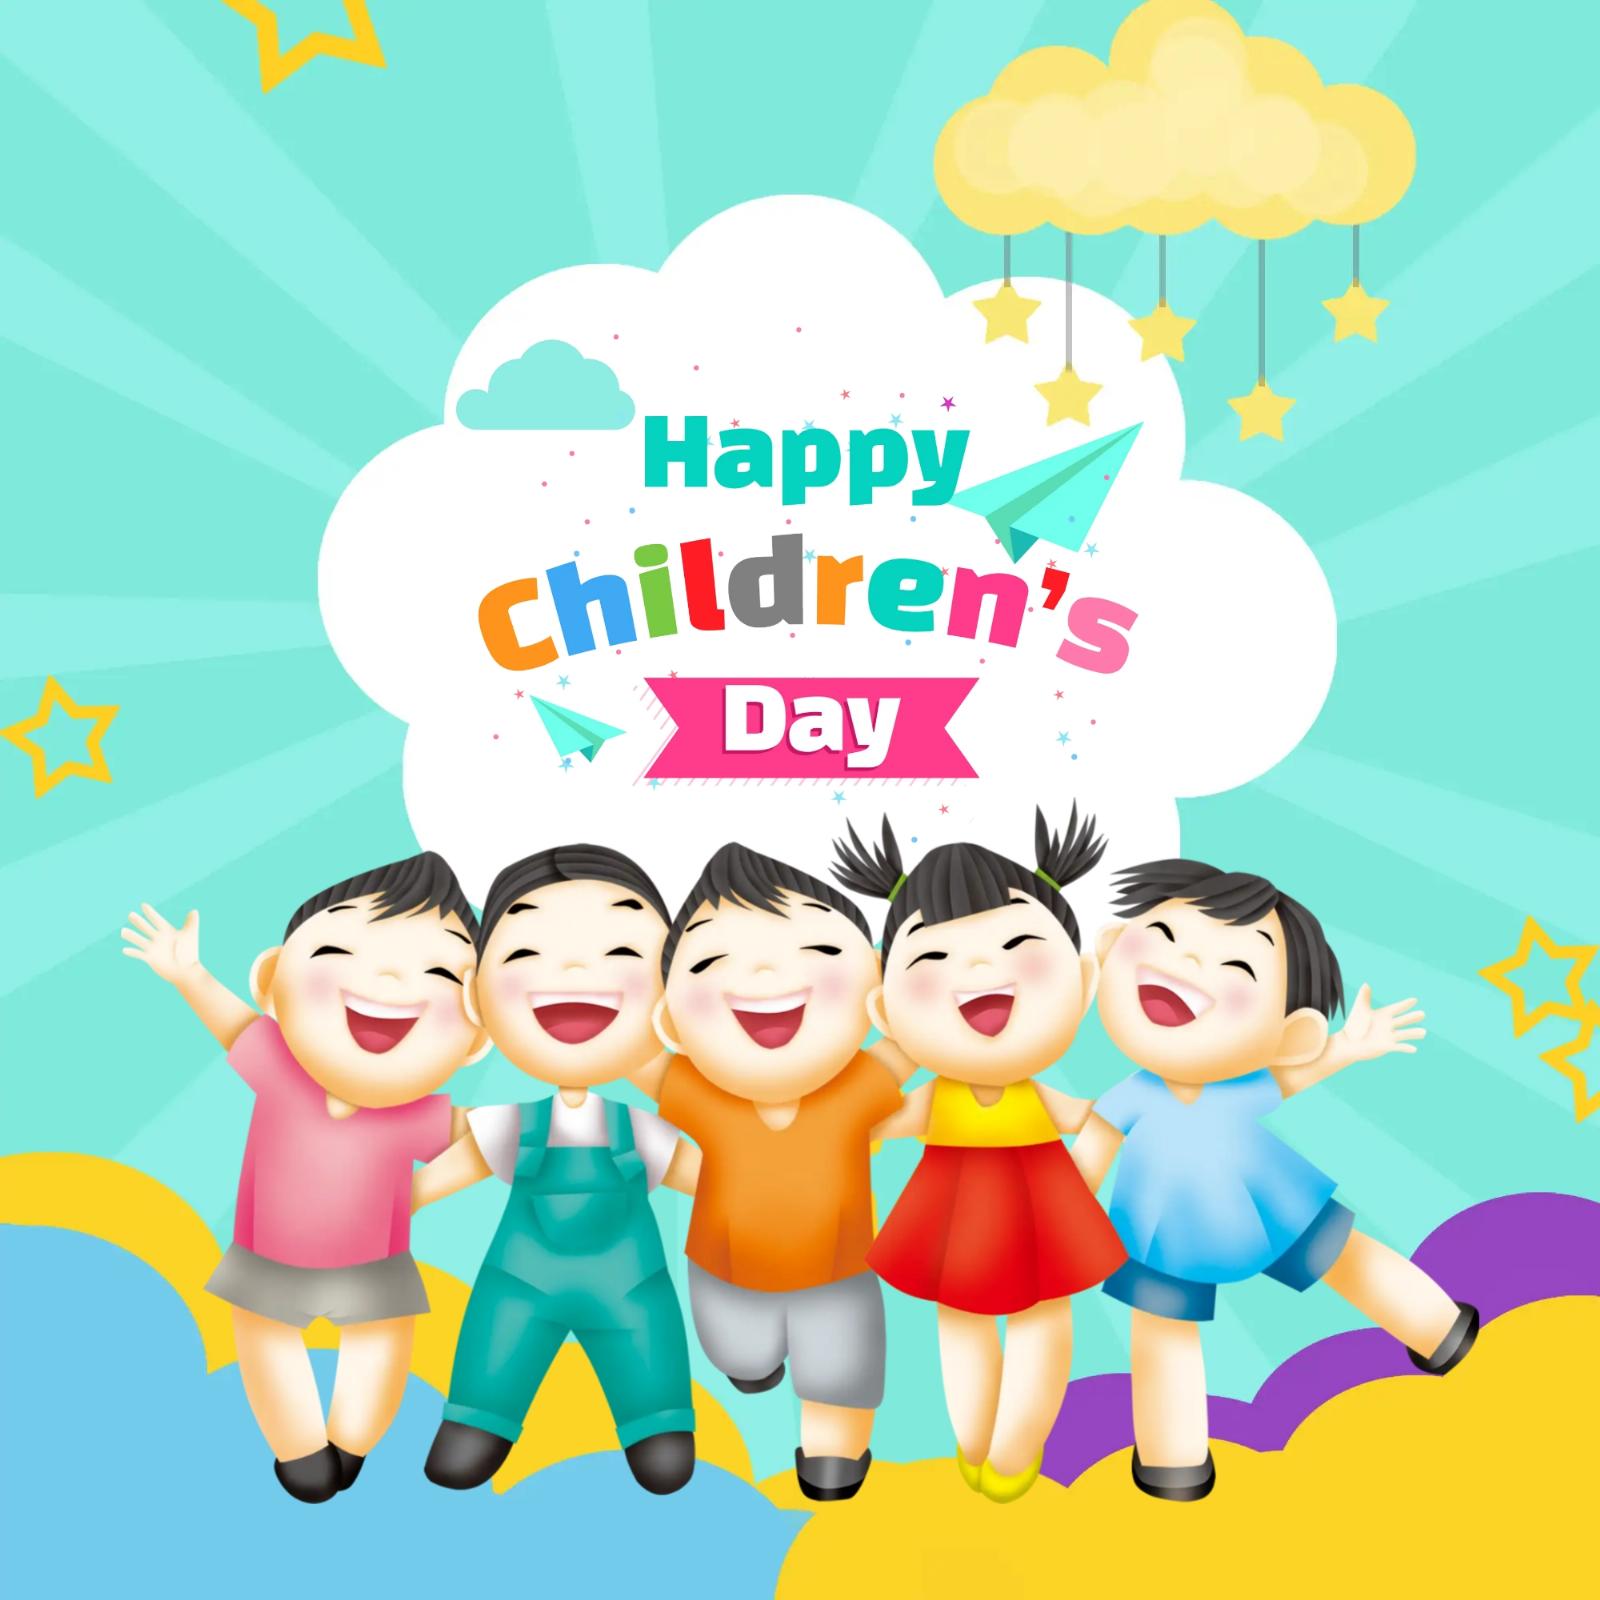 Happy Childrens Day Greetings Images